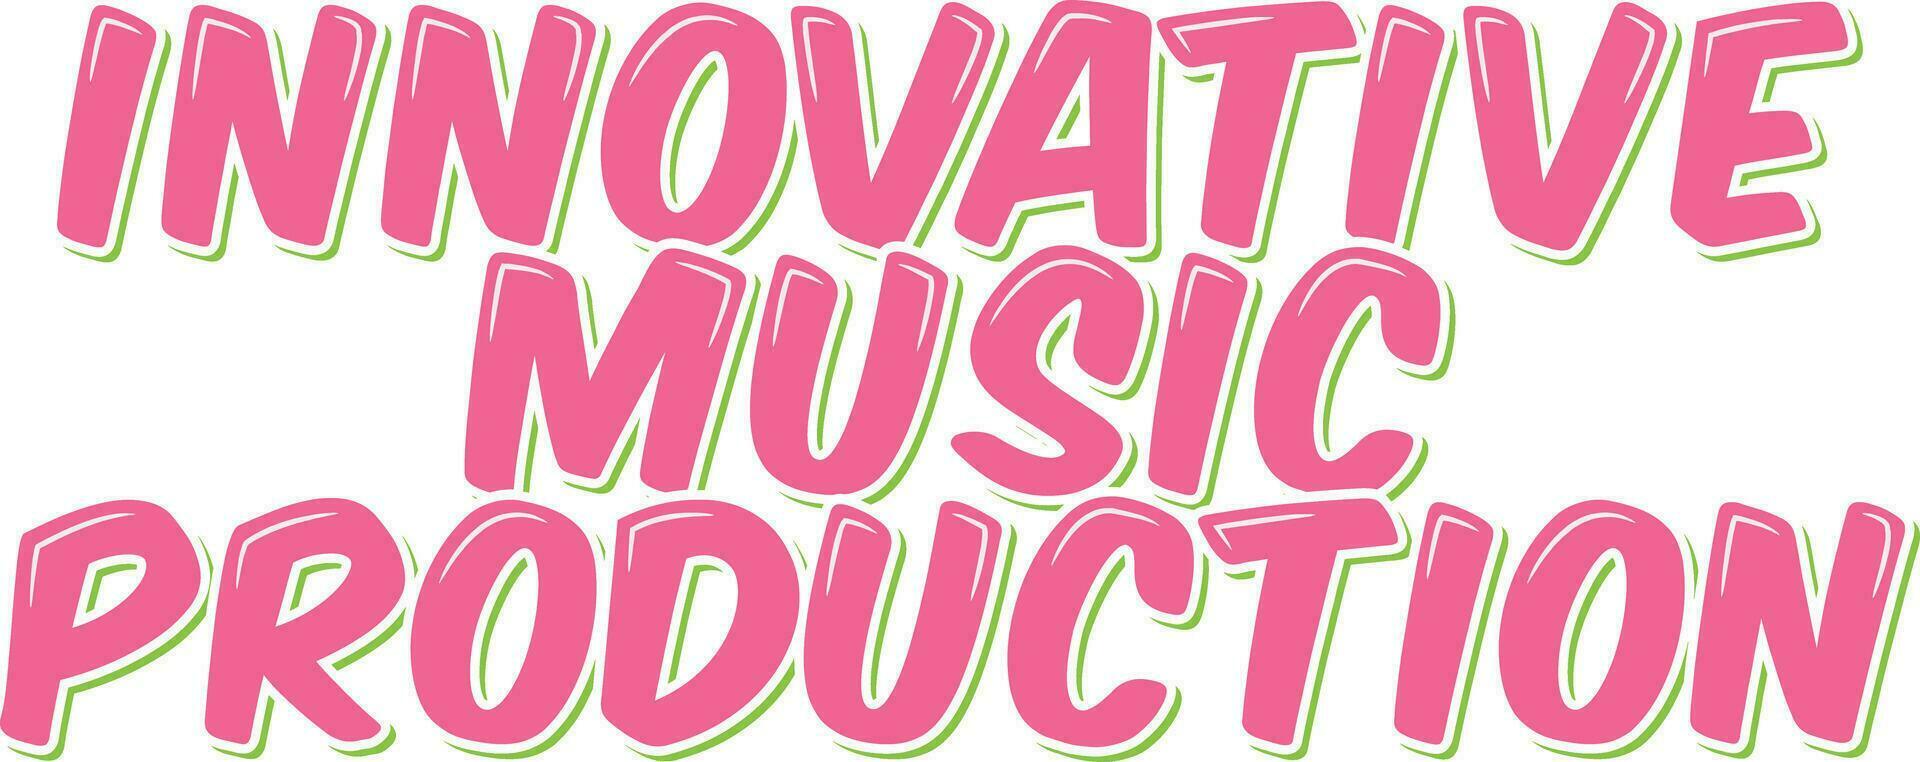 Innovative Music Production Lettering Vector Design